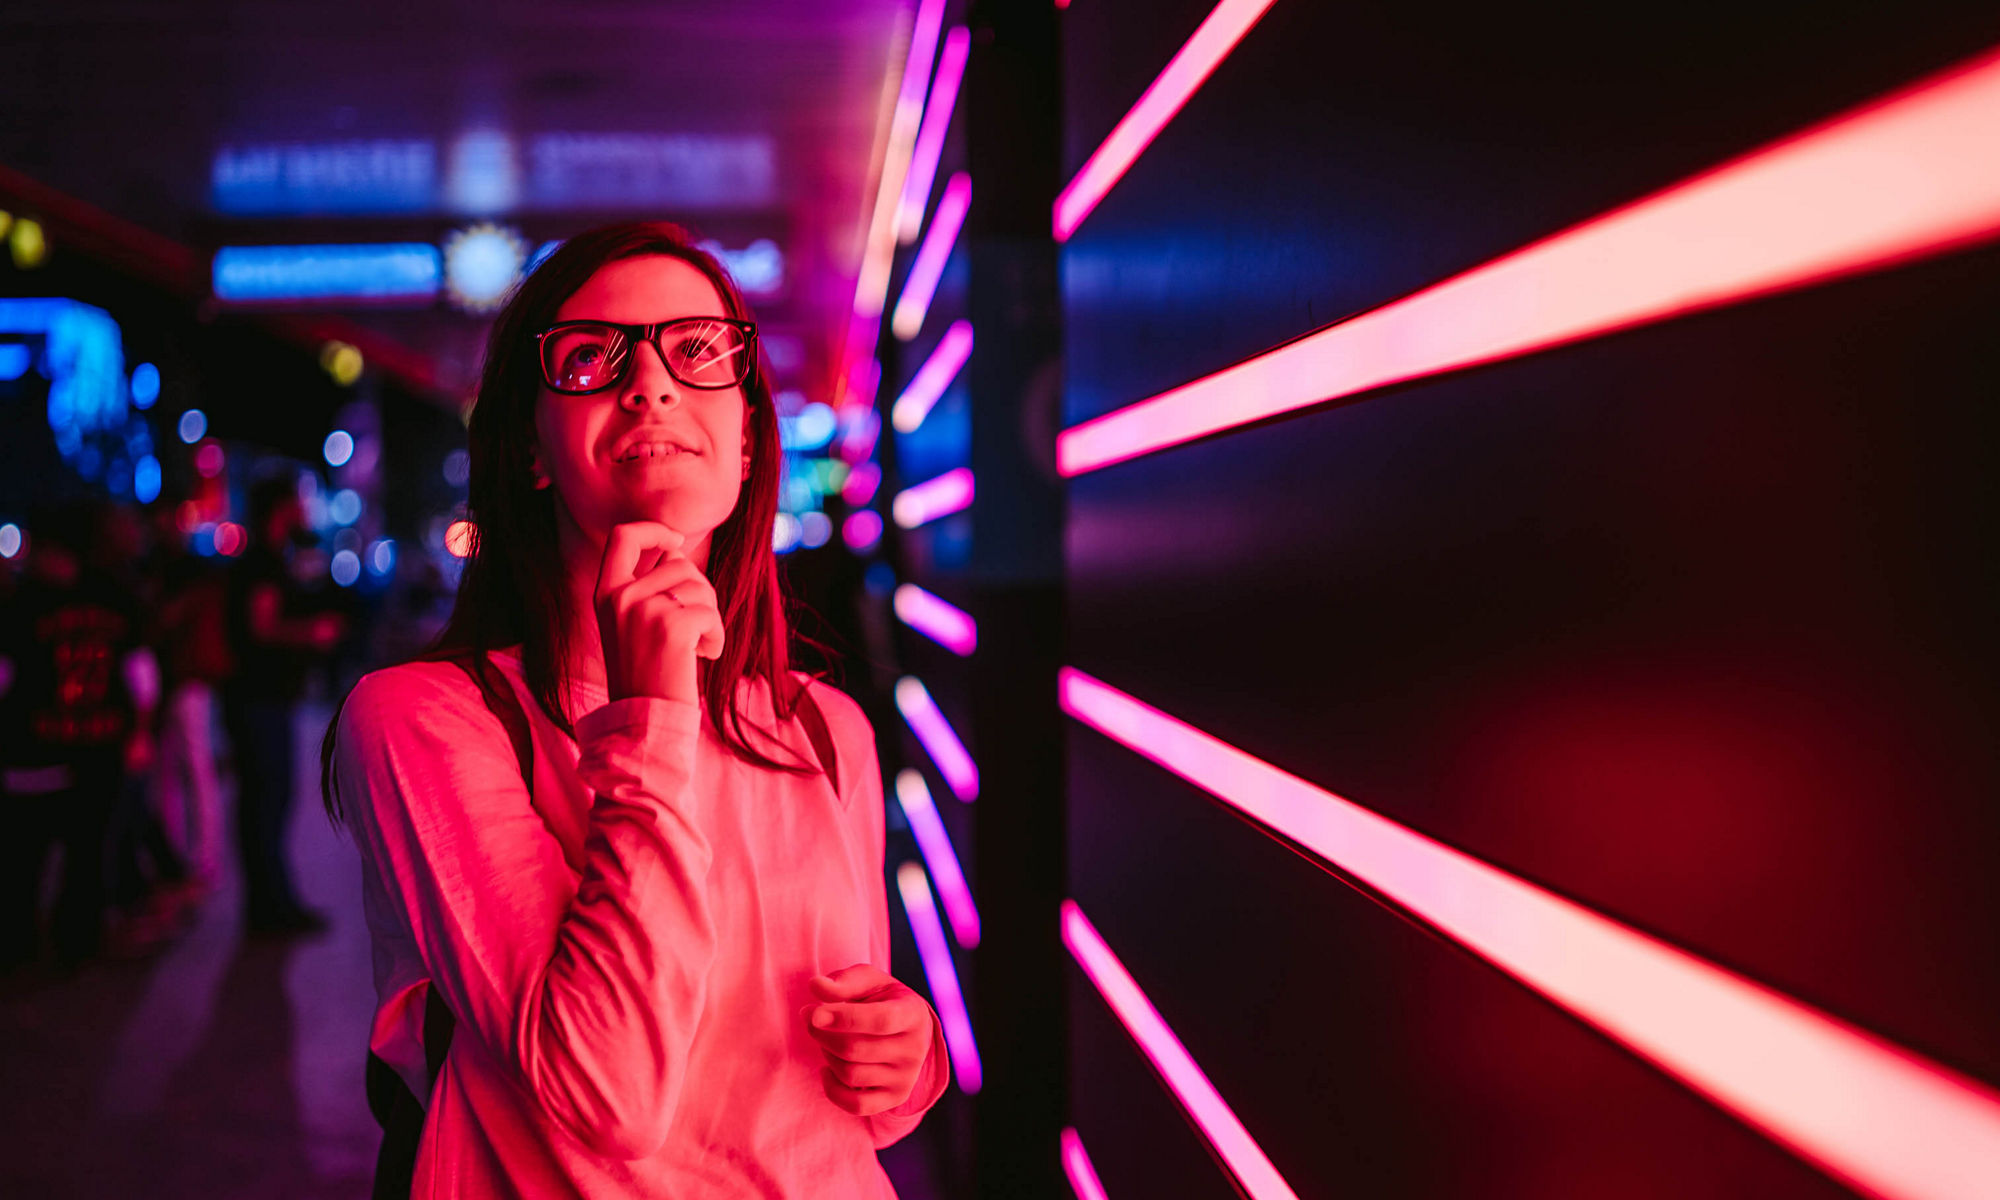 Young smiling woman with eyeglasses, standing in front of pink neon lights. Hamburg, Germany.